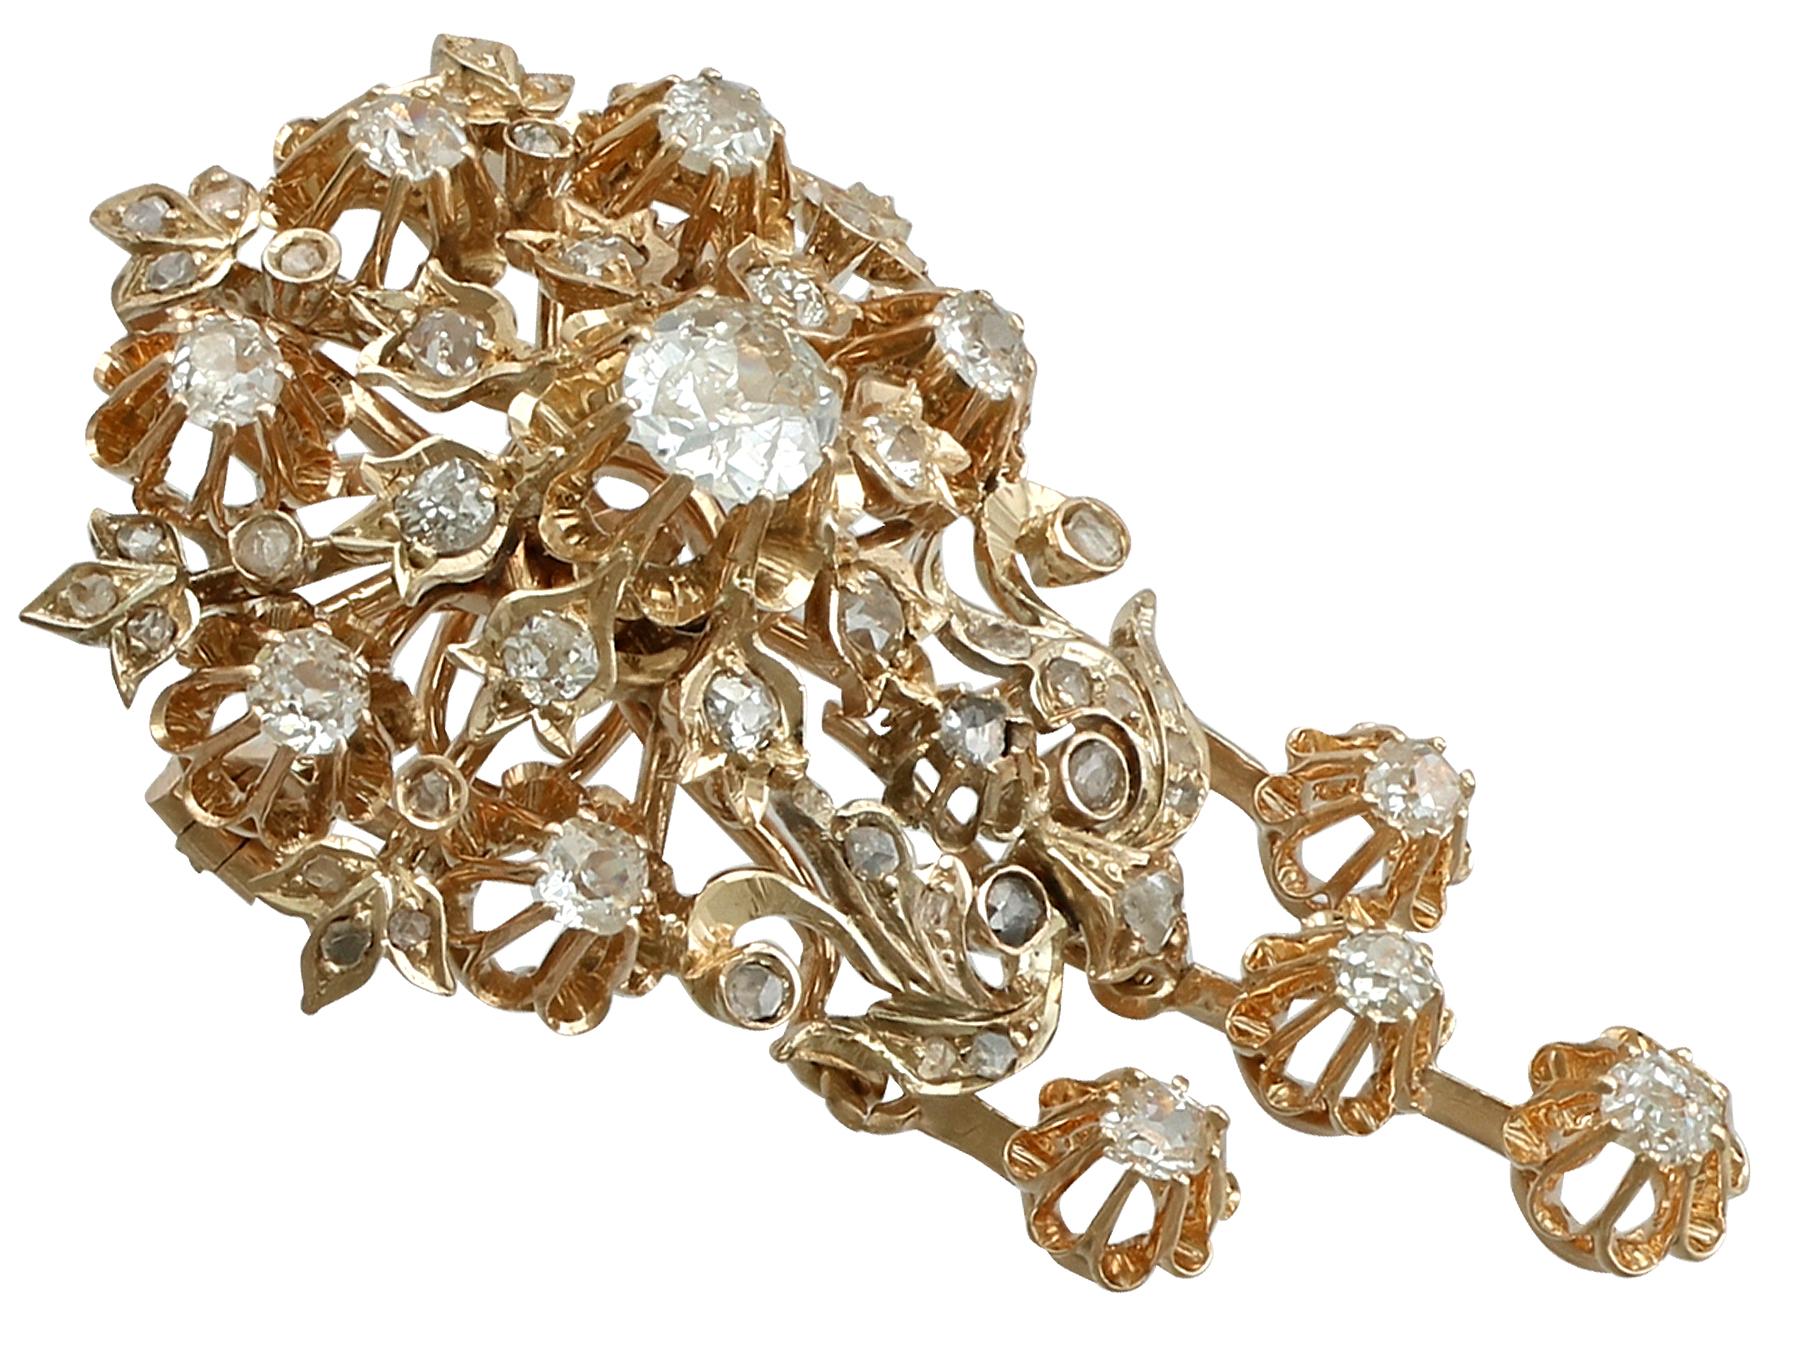 A very fine and impressive antique Austro-Hungarian 3.04 carat diamond, 19k yellow gold brooch; part of our diverse antique jewelry and estate jewelry collection.

This fine antique Austro-Hungarian diamond brooch has been crafted in 19k yellow